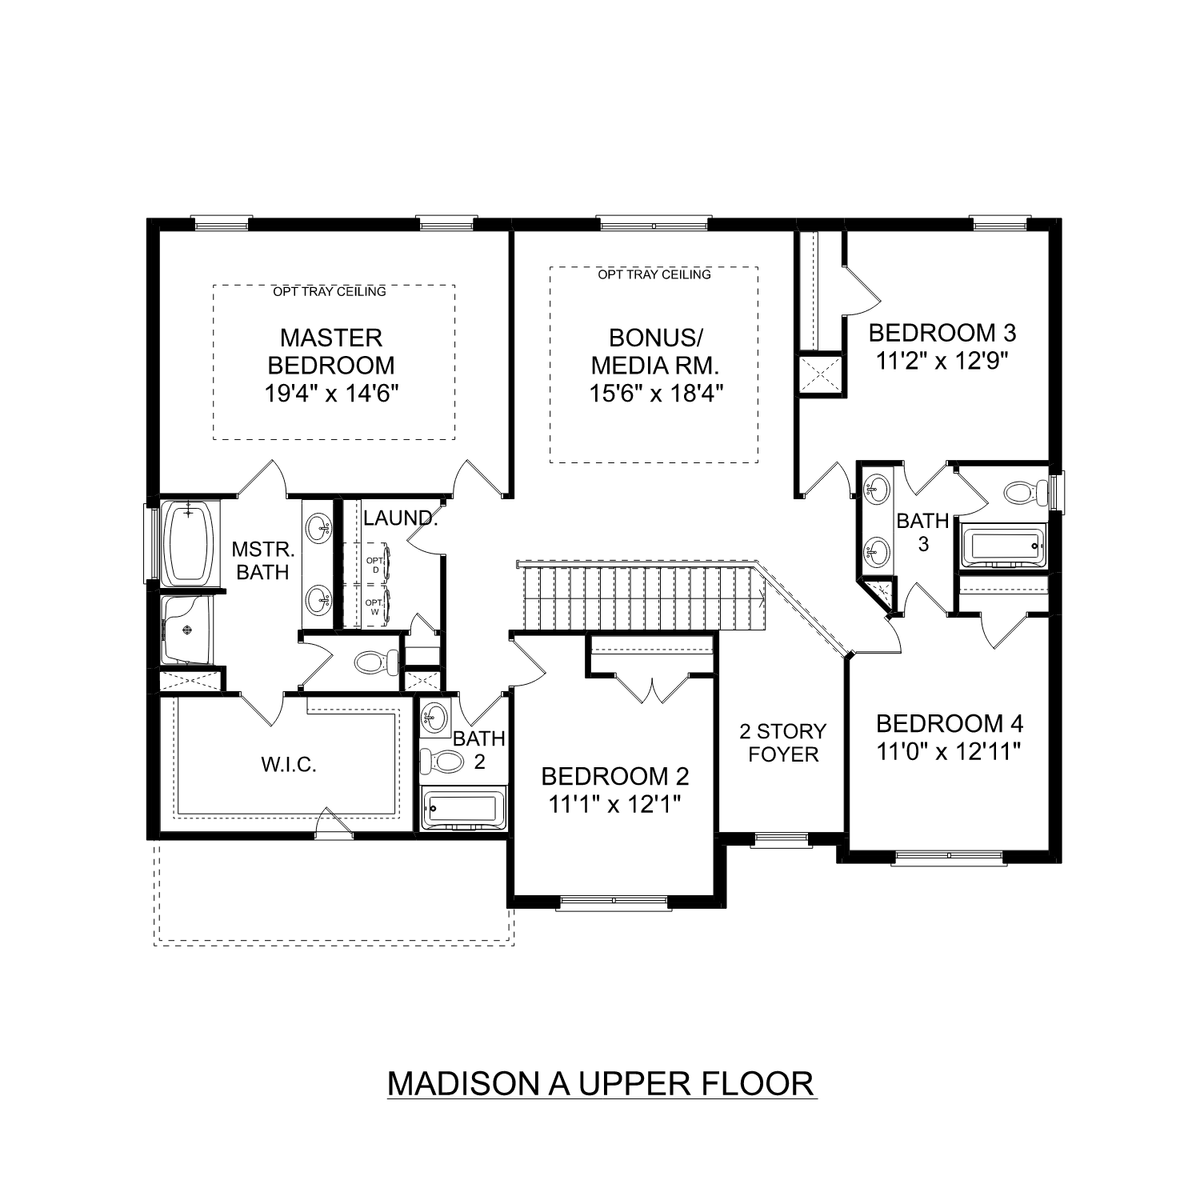 2 - The Madison A buildable floor plan layout in Davidson Homes' Kendall Downs community.